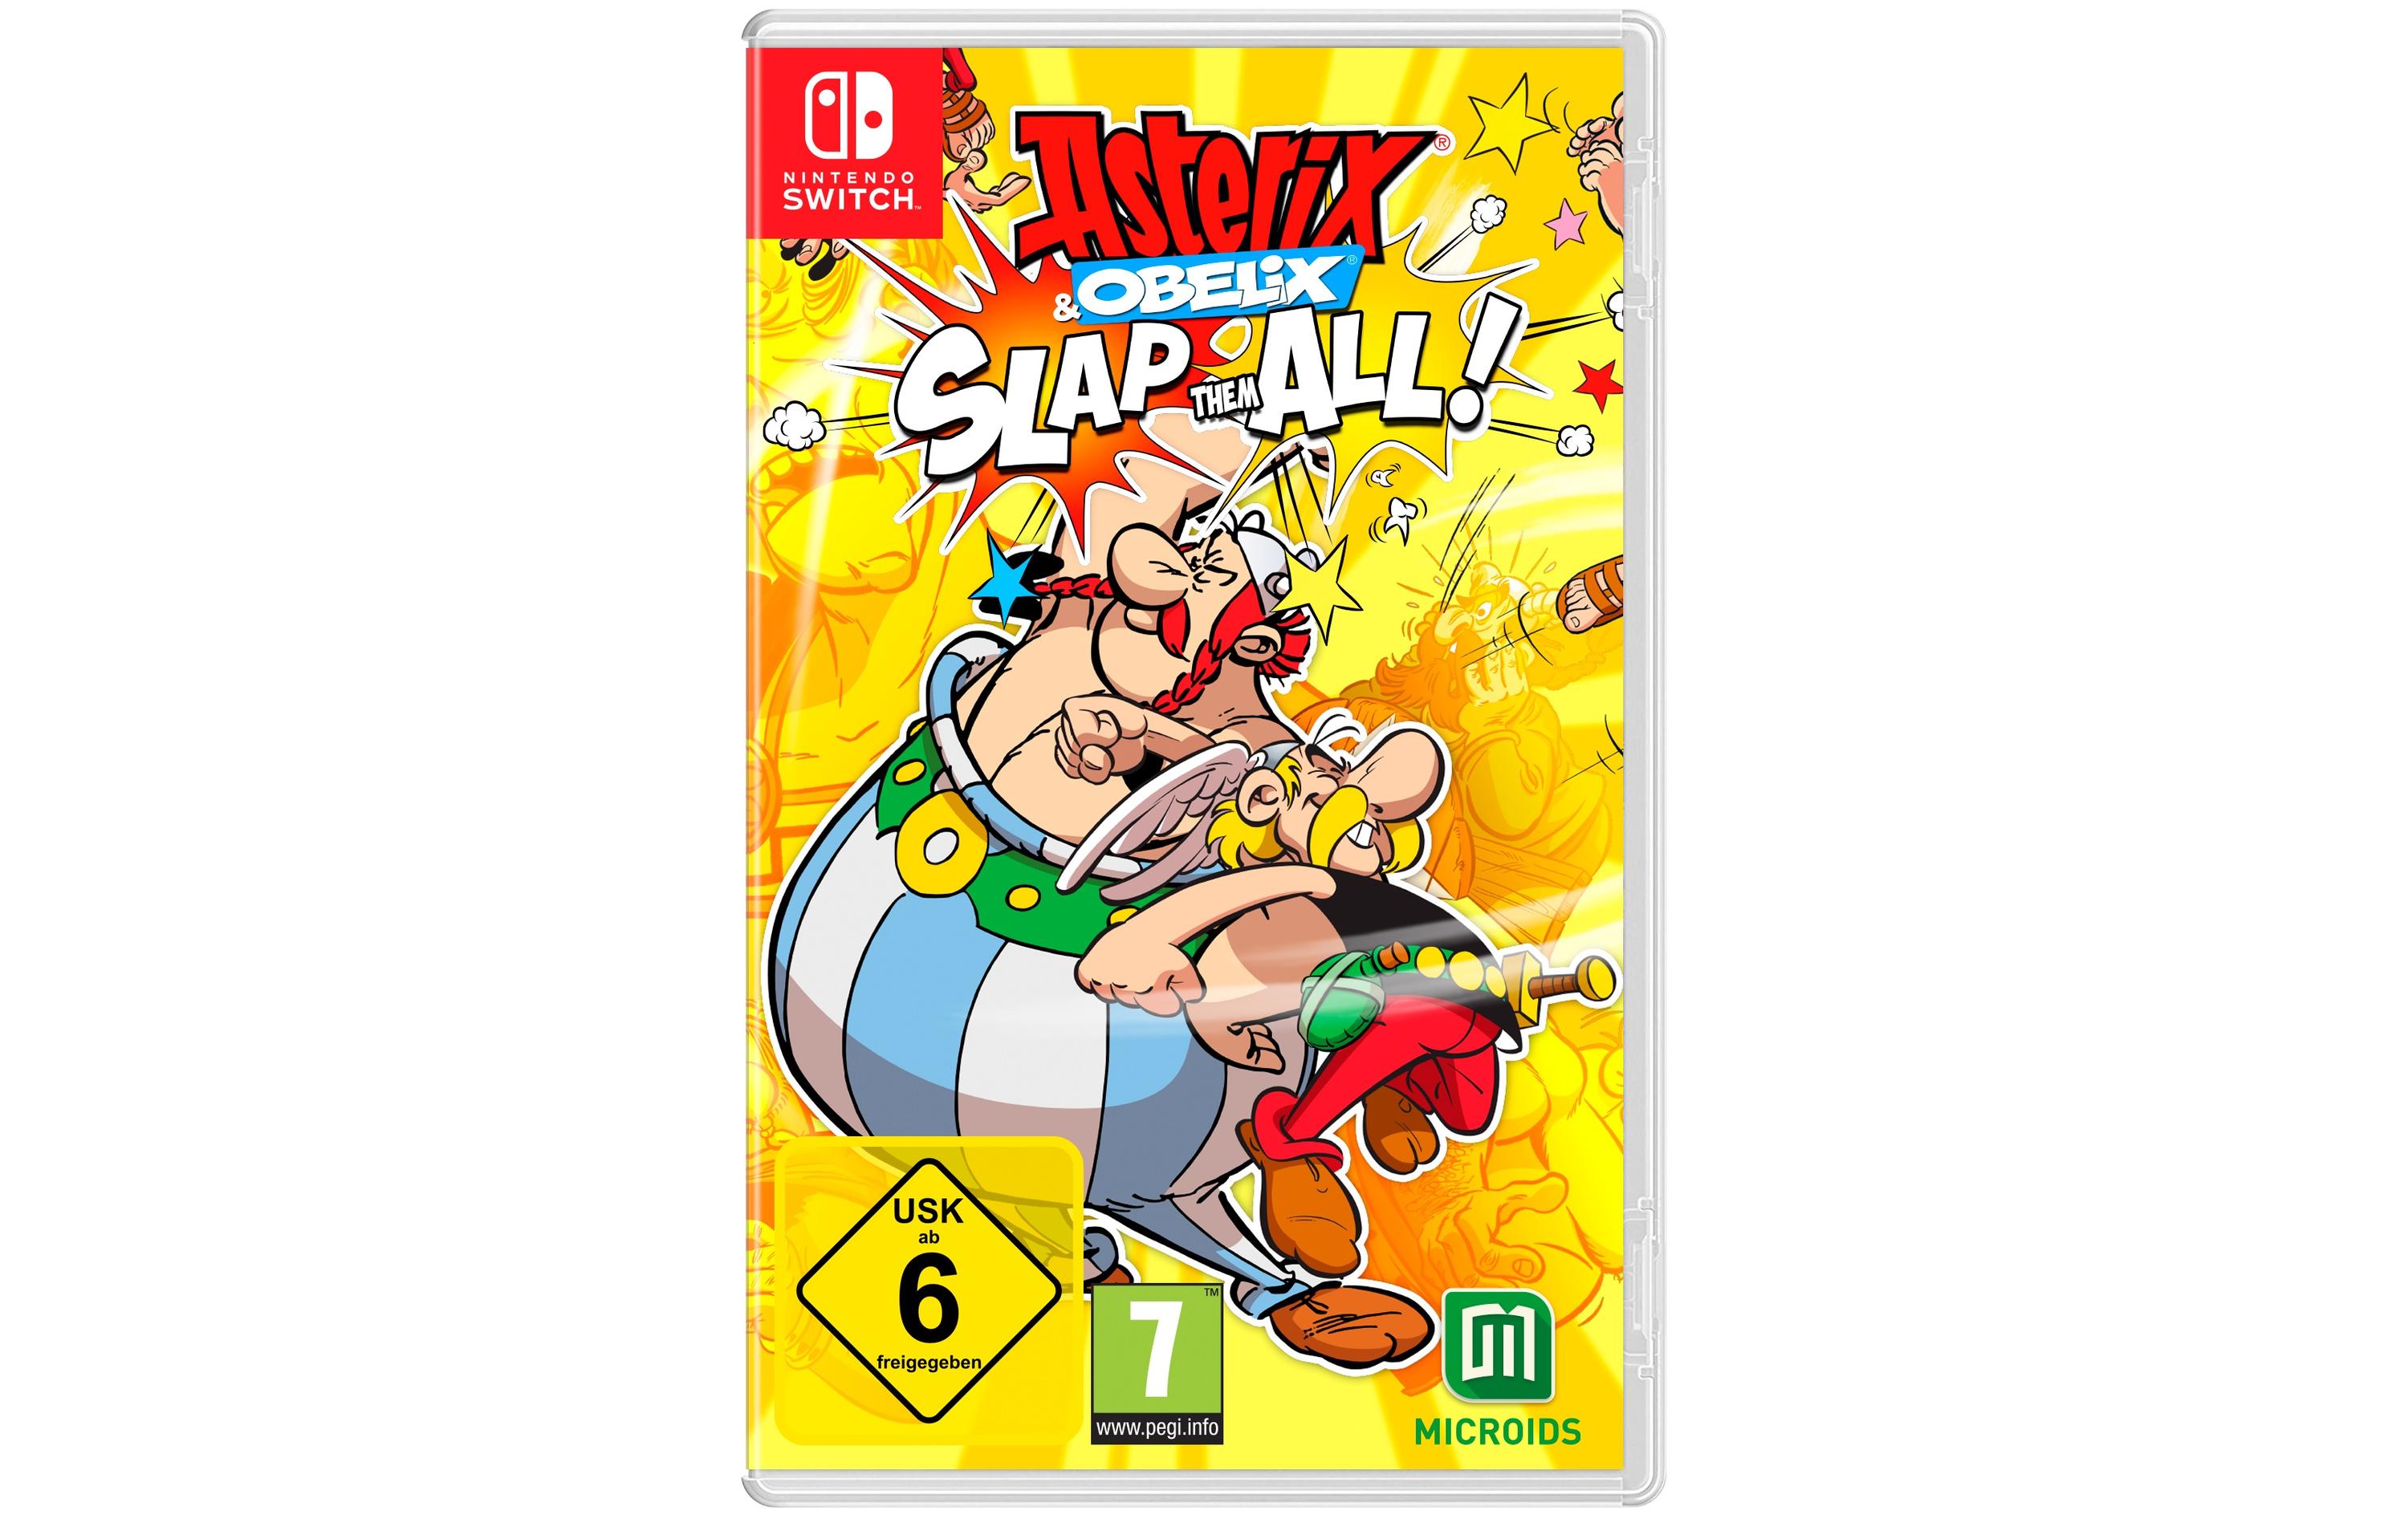 GAME Asterix & Obelix: Slap Them All! - Limited Edition